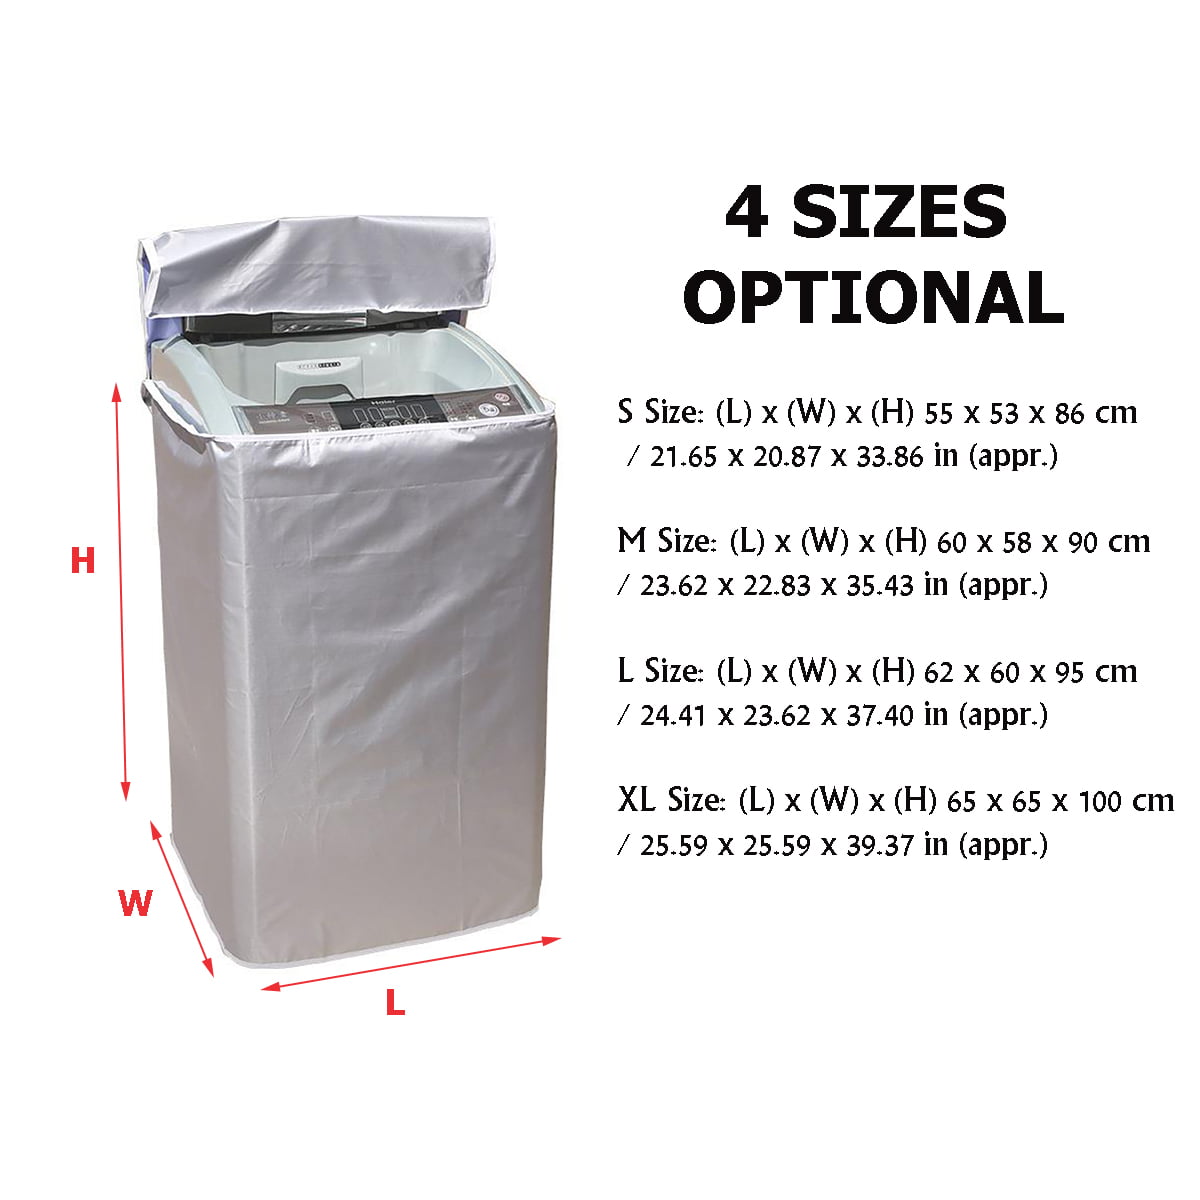 24 X 25 X 38 Inches X-Large Silver W 23 D 24 H 36 in Size : L FWKTG Washing Machine Protective Cover Top Load Washer Dryer Cover Waterproof Full-Automatic/Wheel Washing Machine Cover 